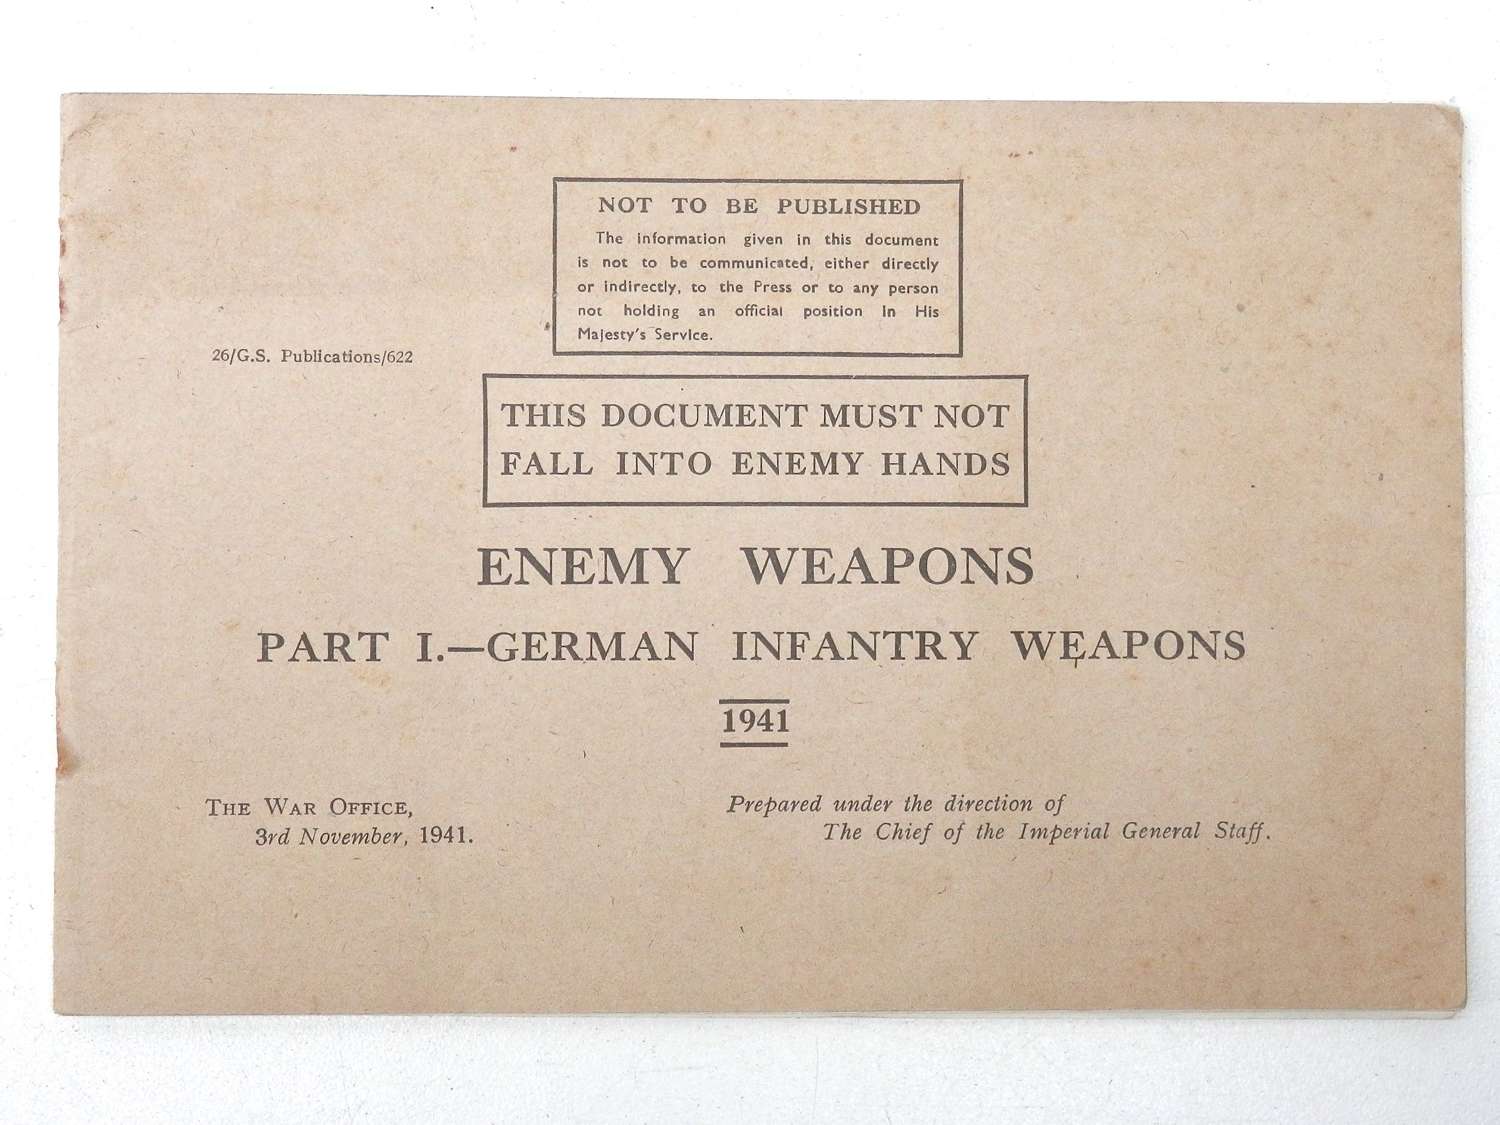 Enemy weapons manual